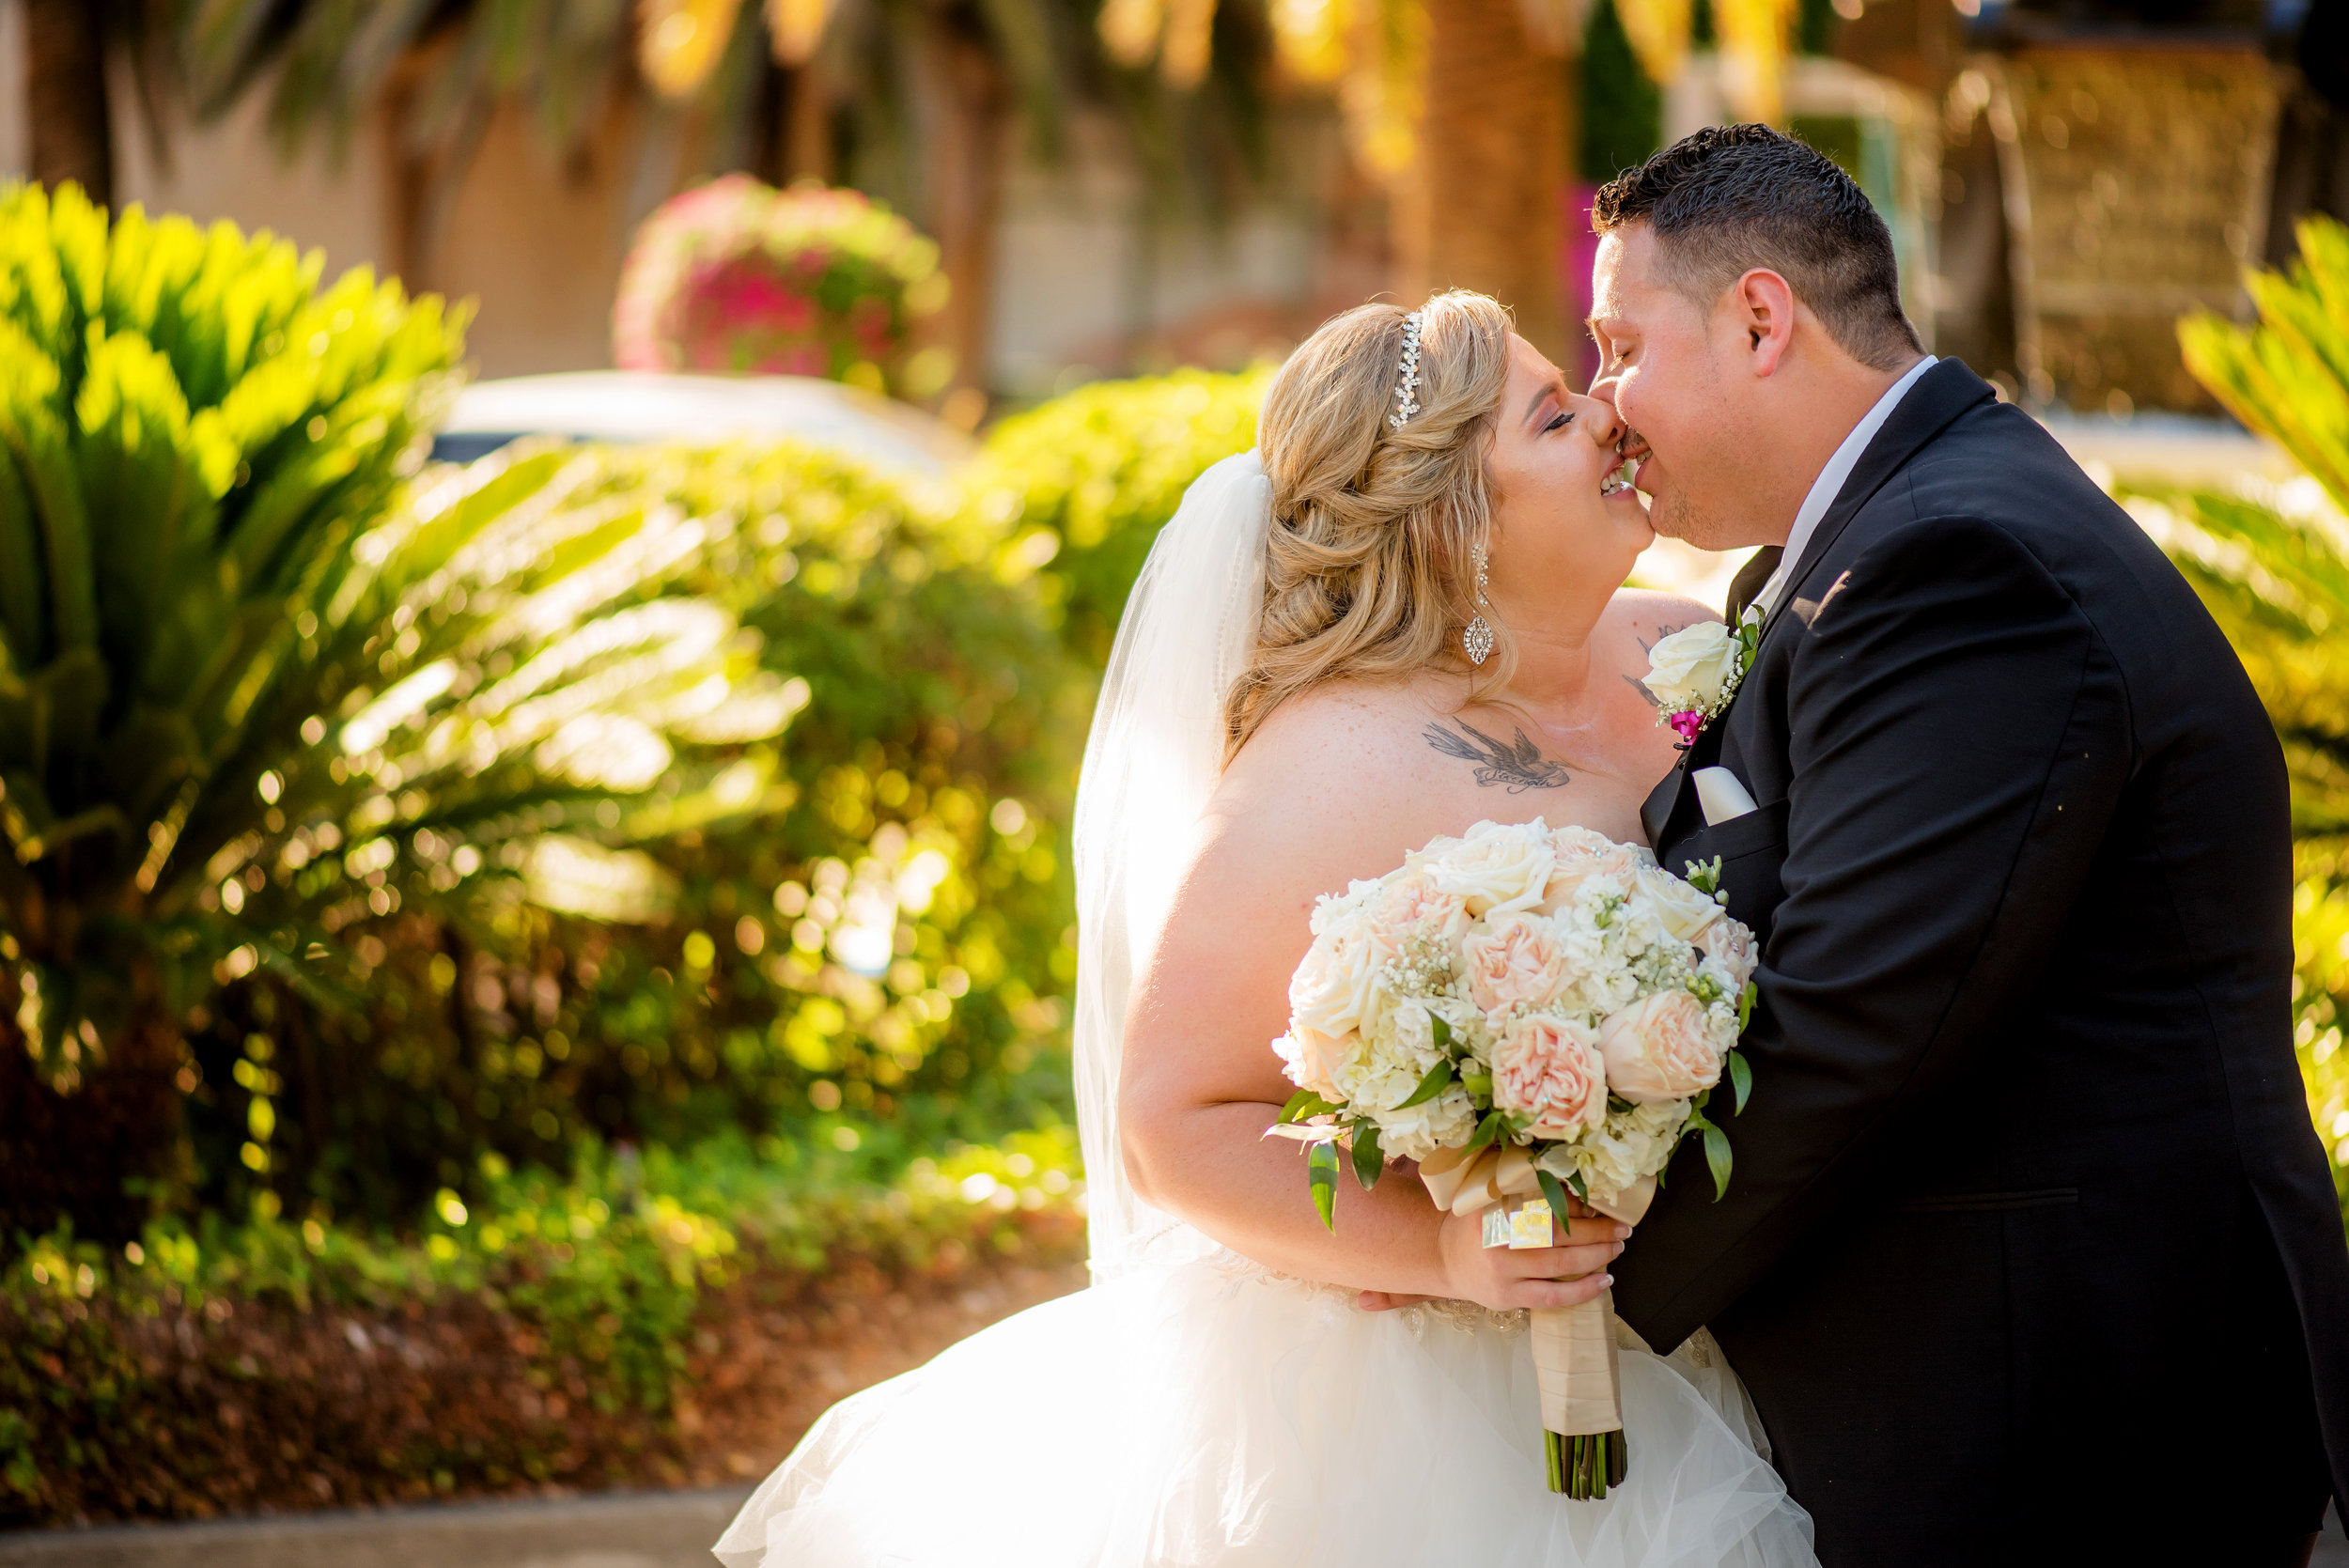  Wedding portrait of bride and groom at Arden Hills Club and Spa in Sacramento California. 